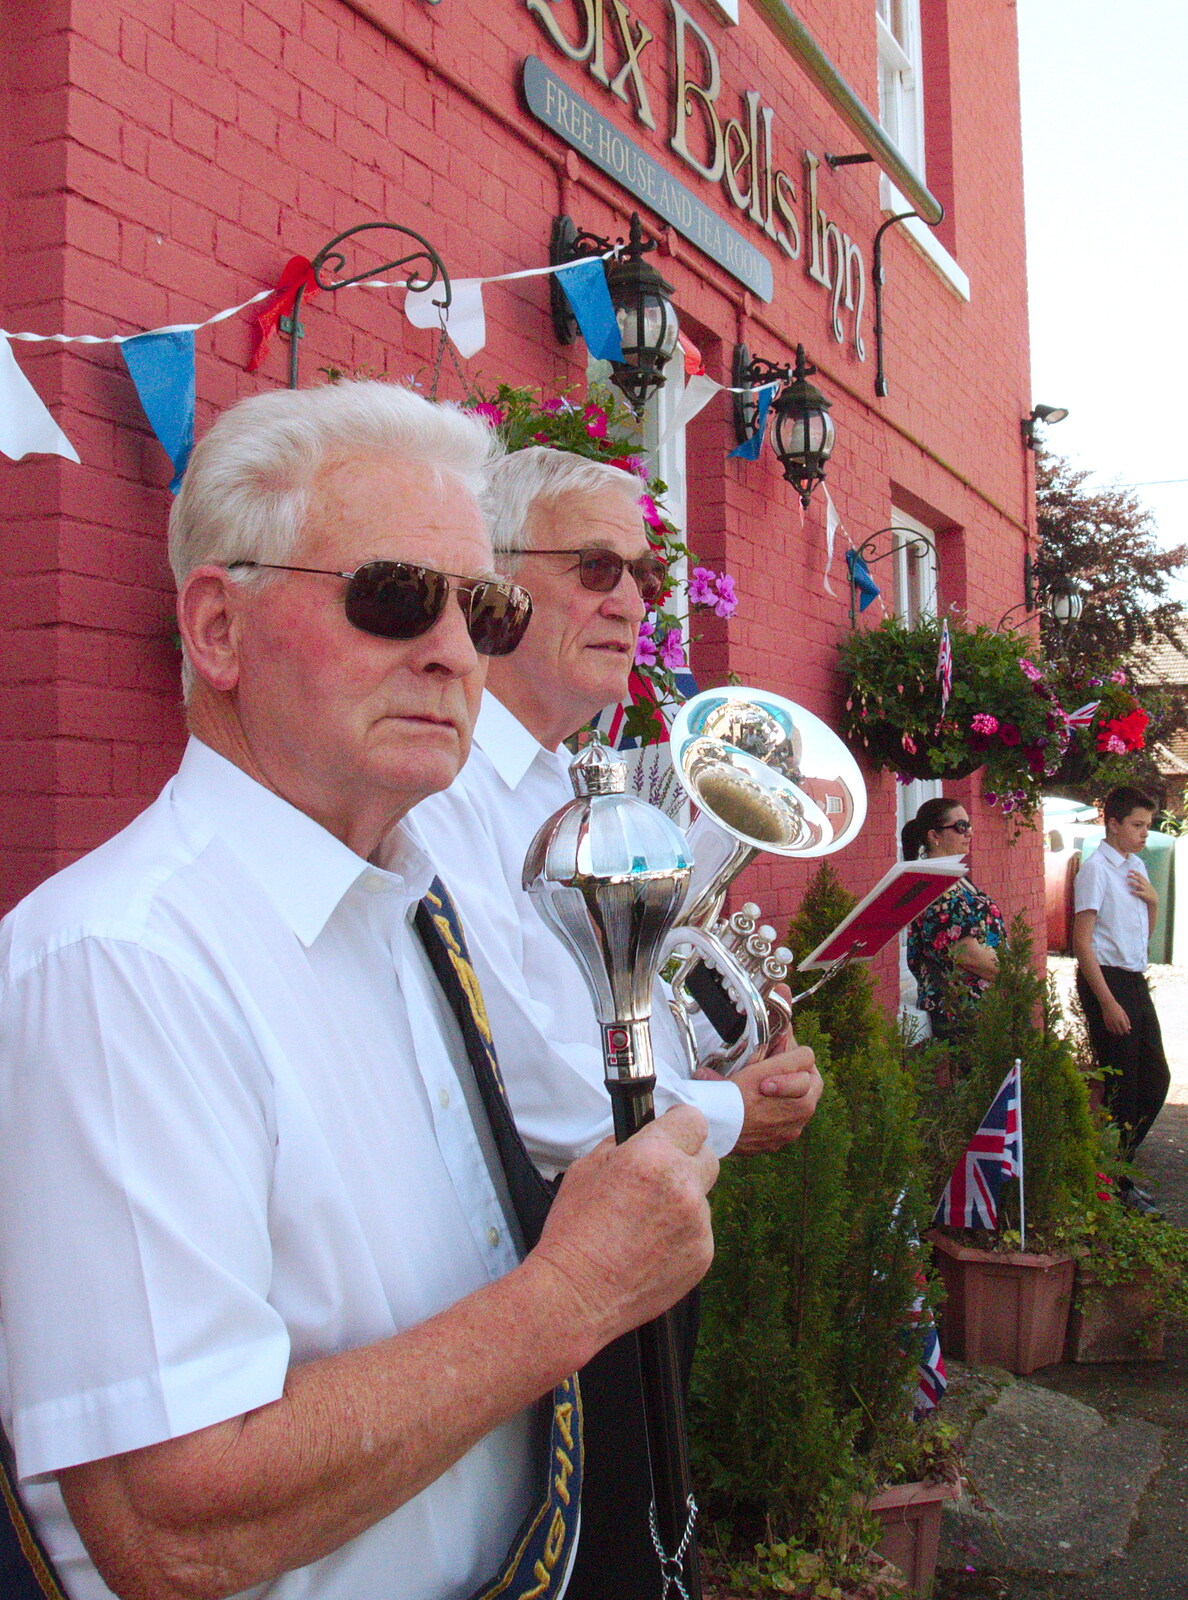 Terry the Drum Major and Peter hang around from GSB and the Gislingham Fete, Suffolk - 29th June 2019